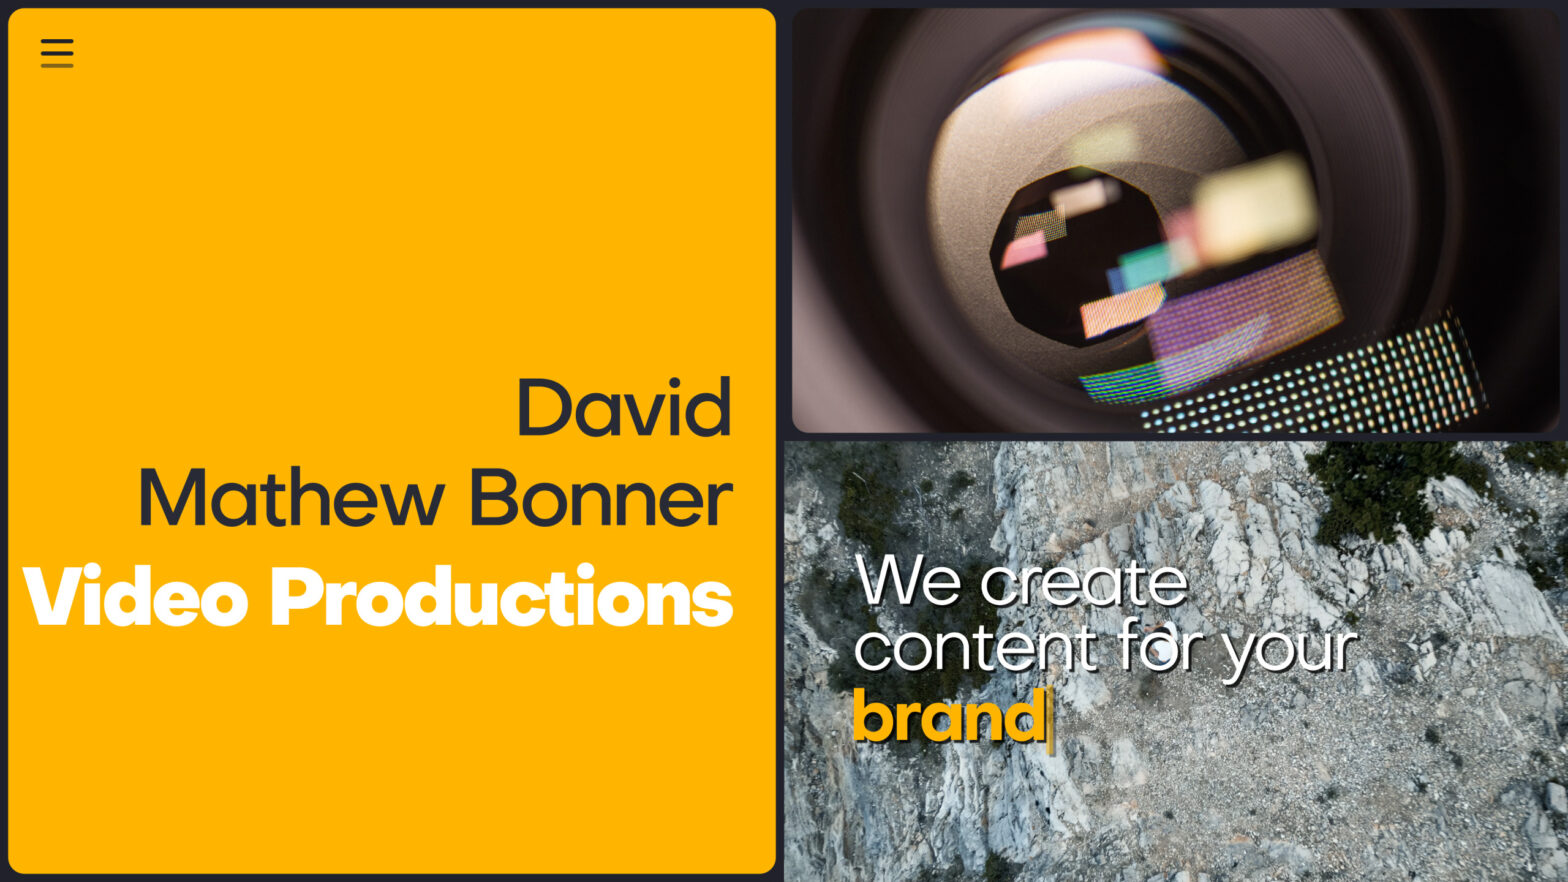 From Concept To Creation _ Edmonton Videographer DMB Video Productions